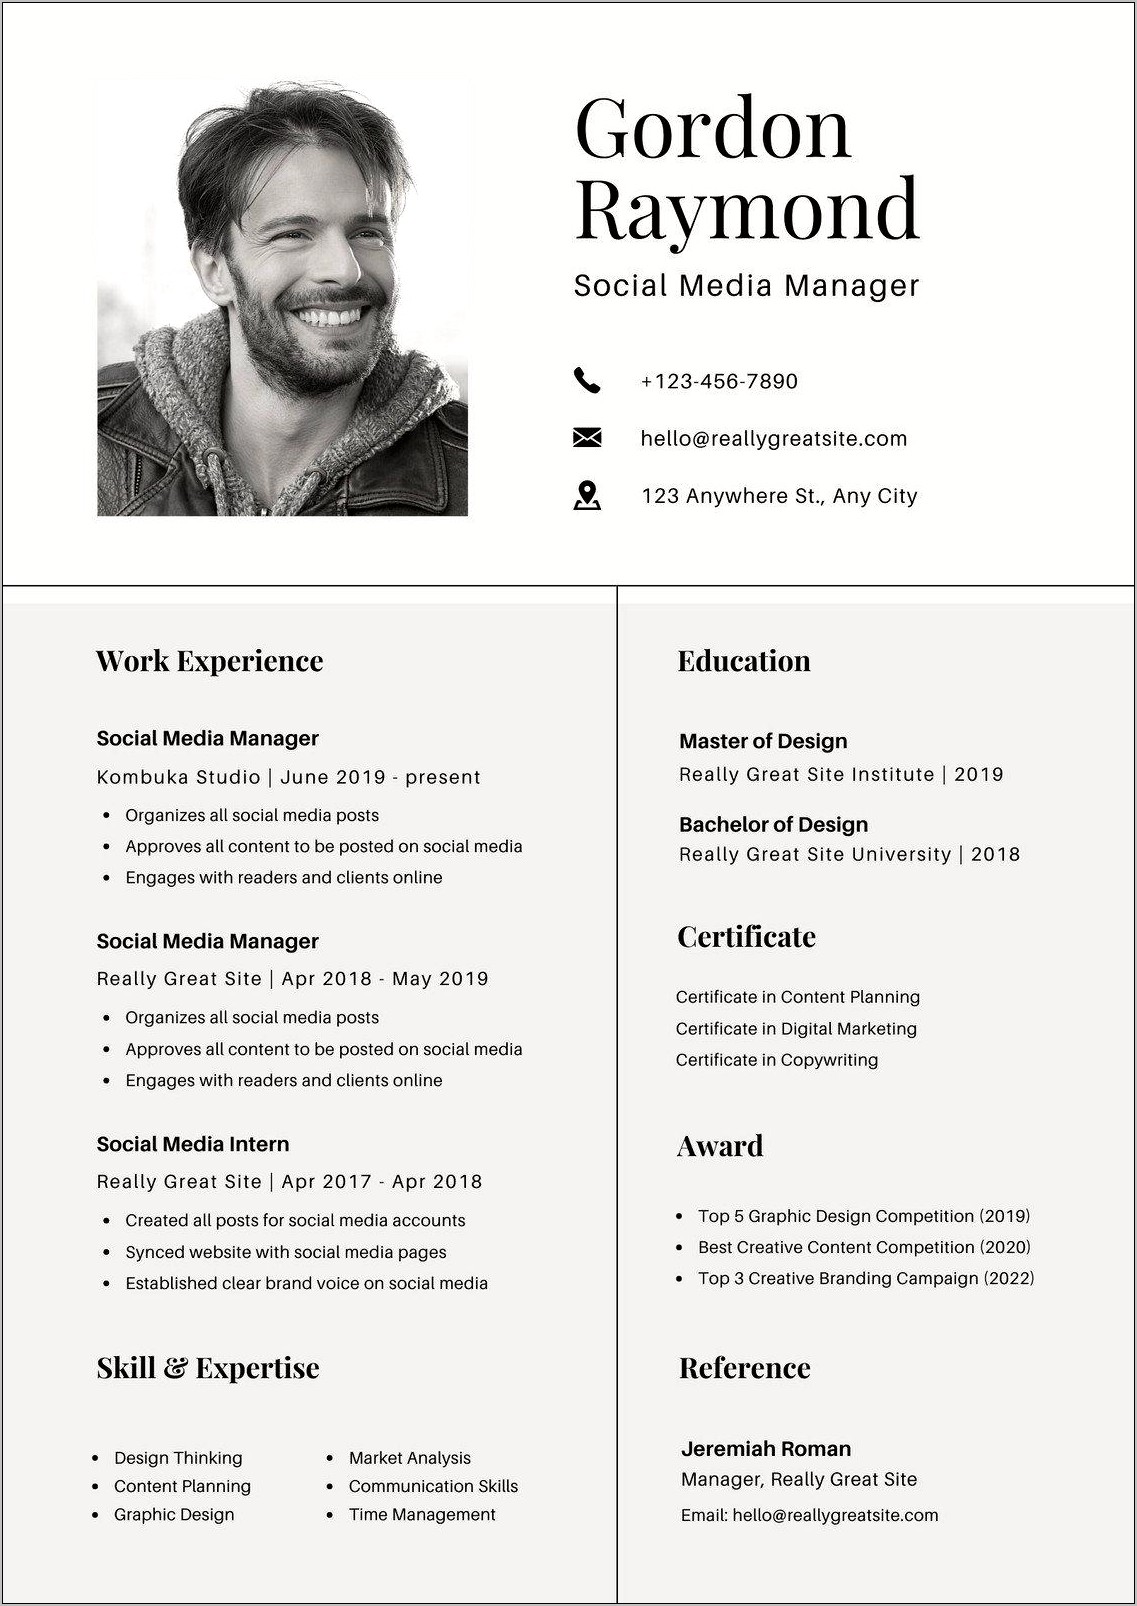 Access To More Resume Templates With Canva Pro